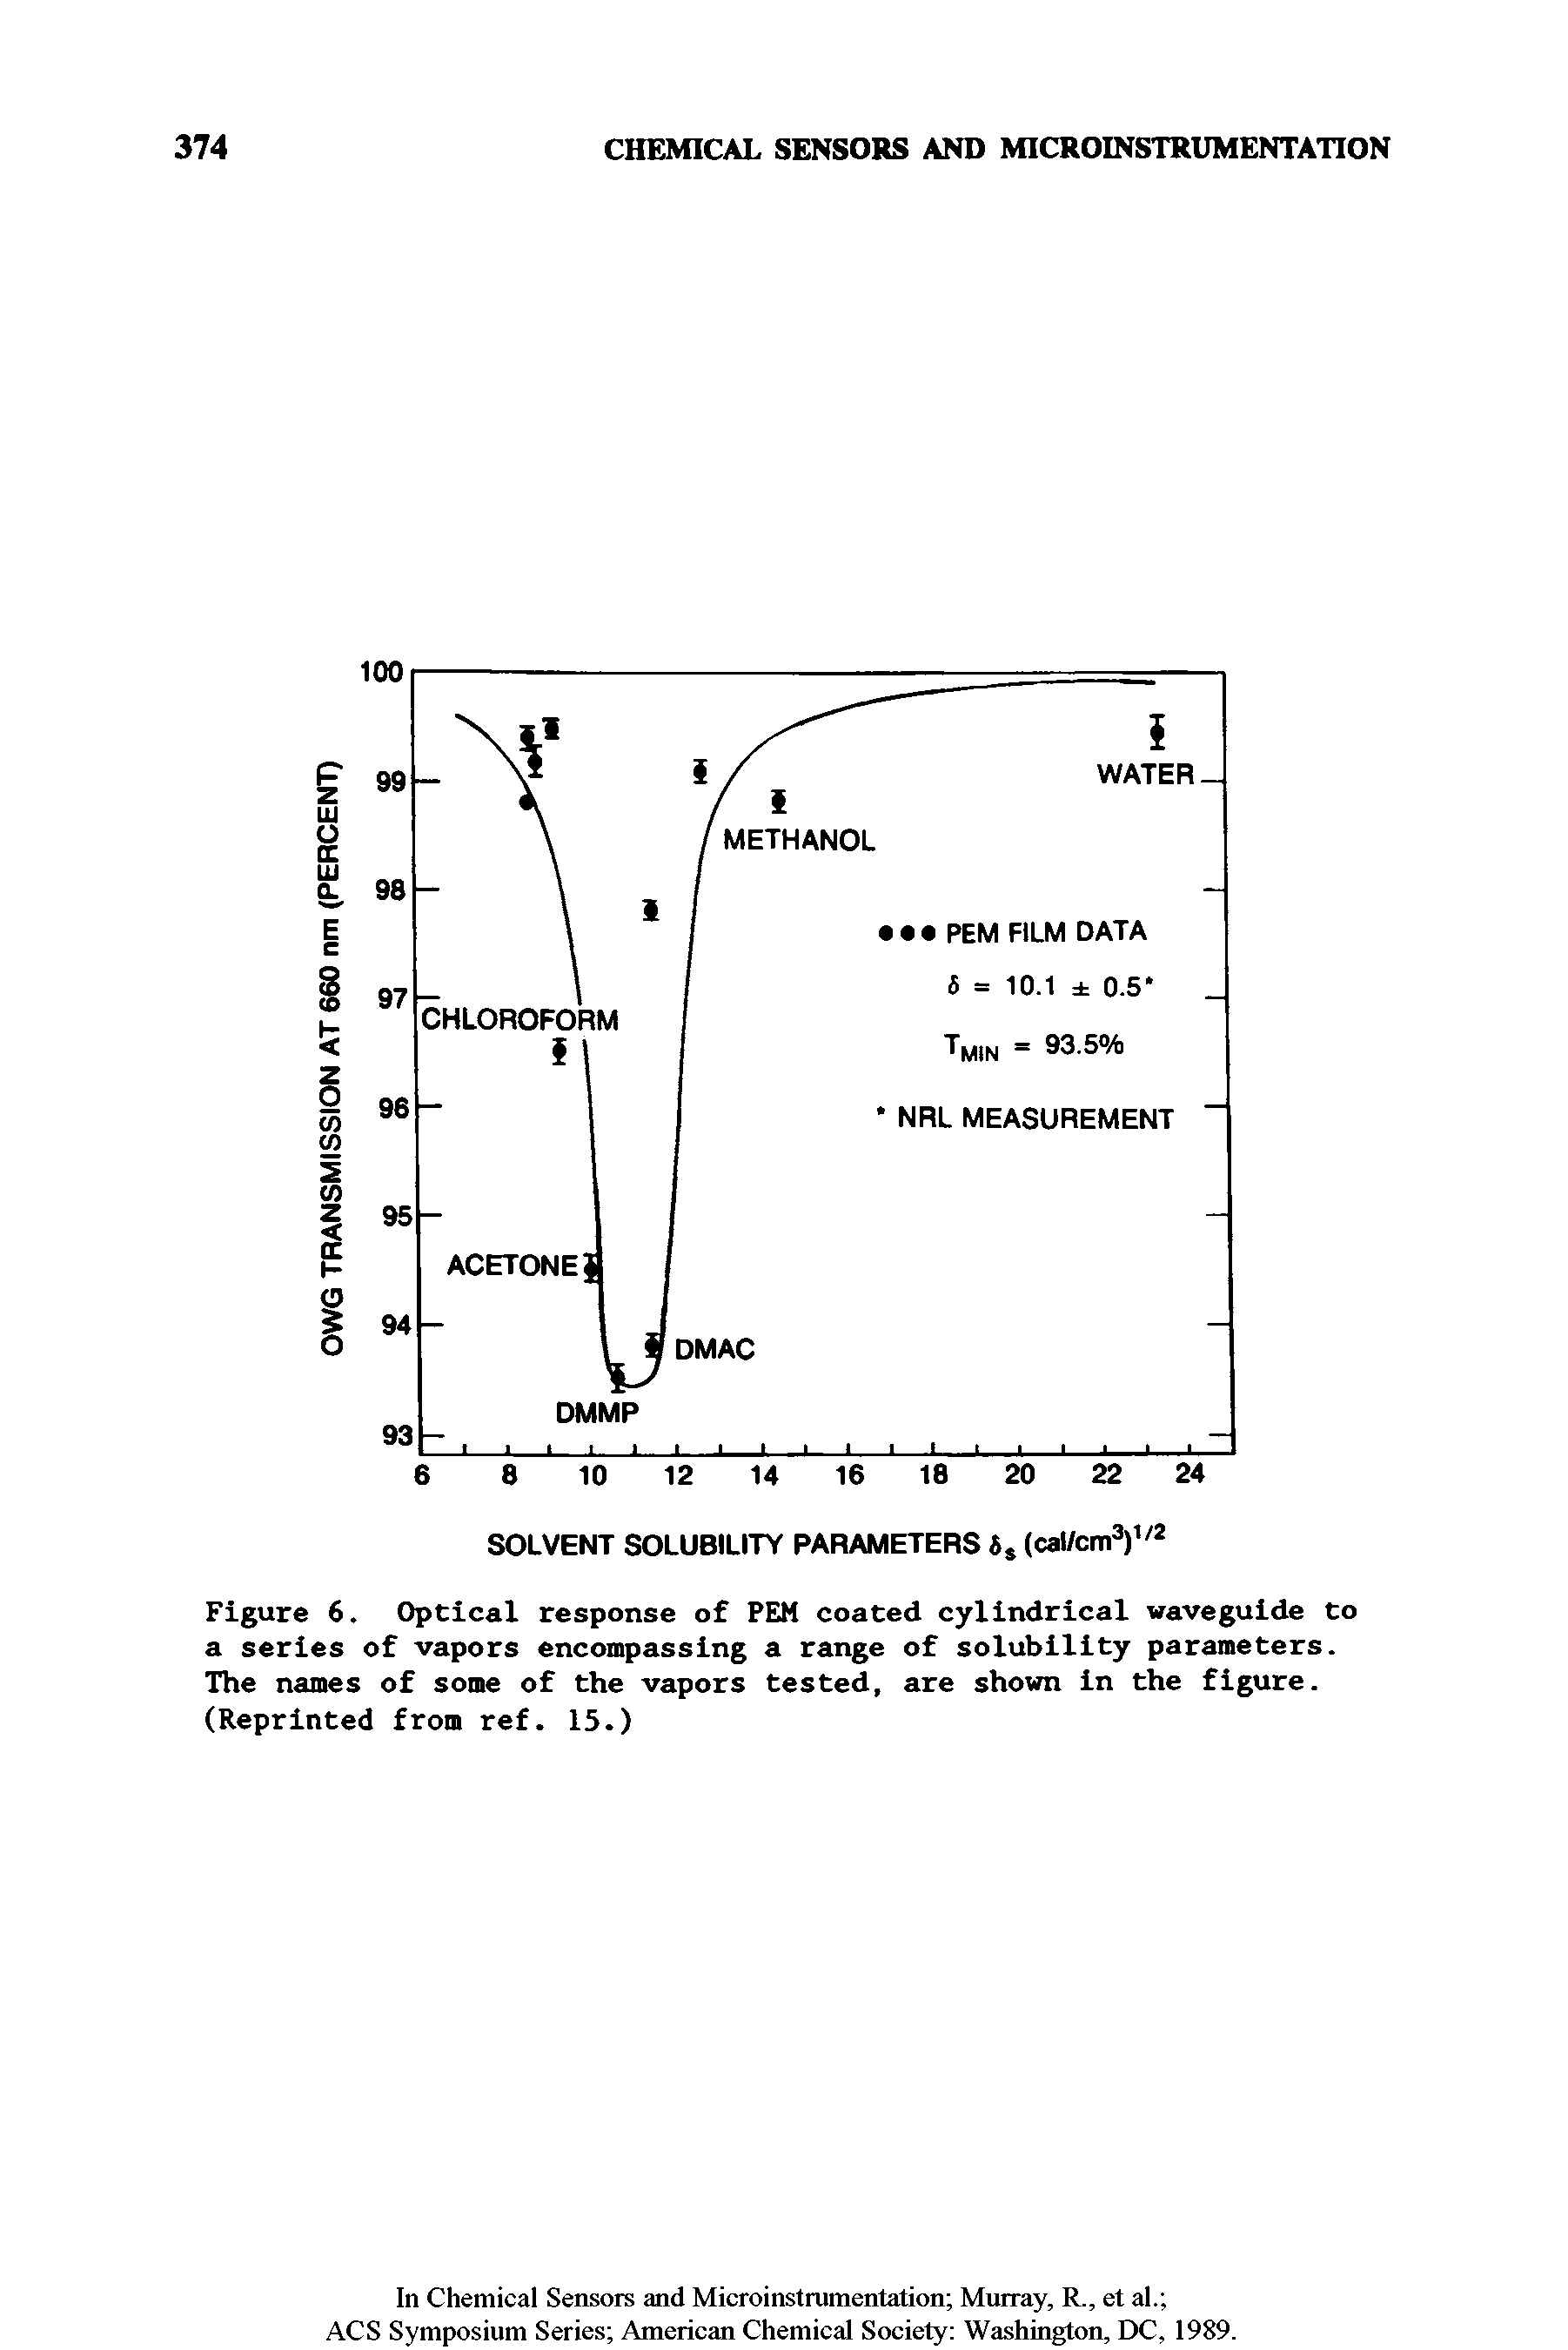 Figure 6. Optical response of PEM coated cylindrical waveguide to a series of vapors encompassing a range of solubility parameters. The names of some of the vapors tested, are shown In the figure. (Reprinted from ref. 15.)...